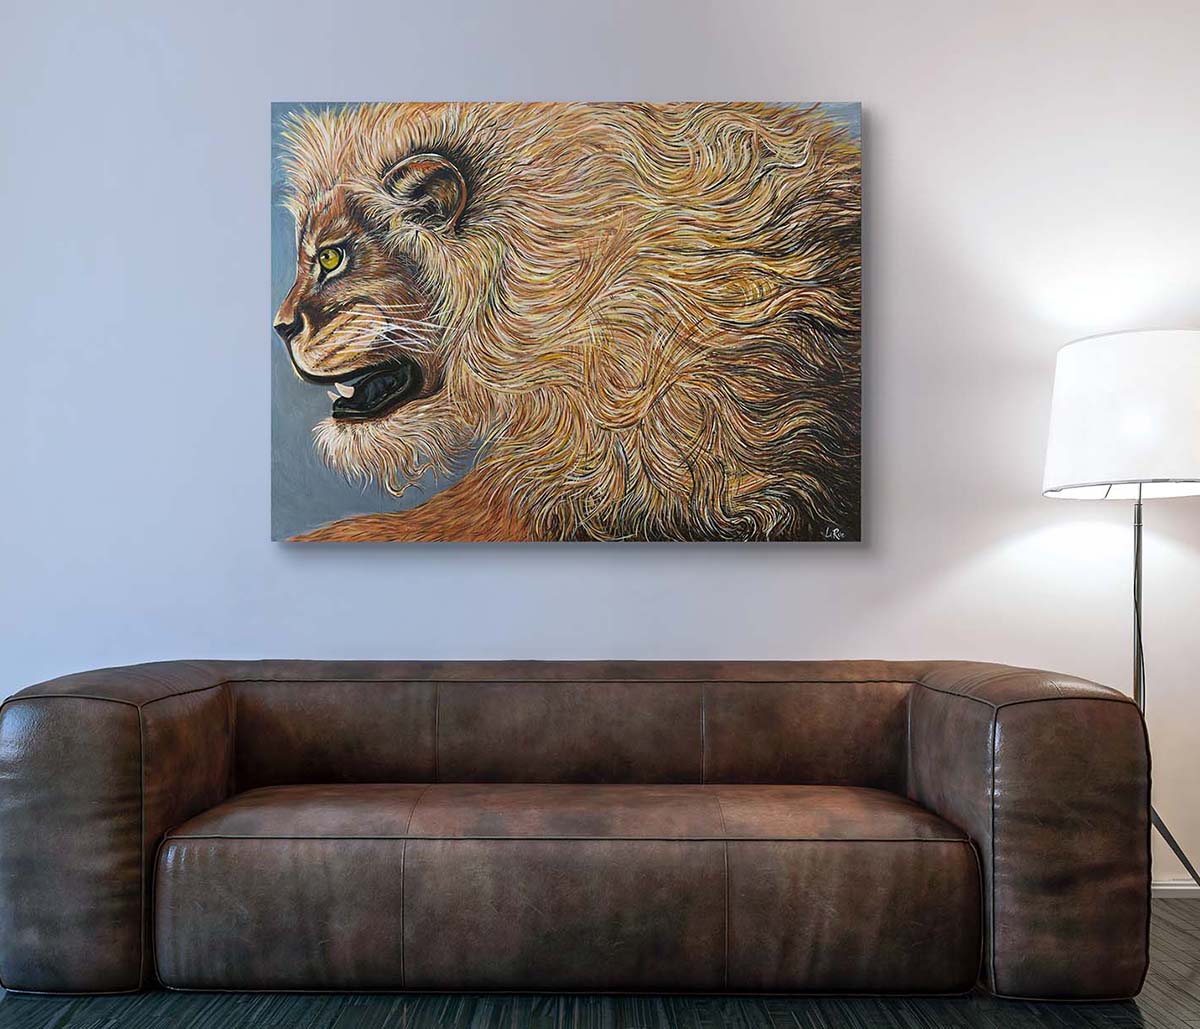 Large art print of Golden Lion painting by Doug LaRue on a wall over a puffy leather couch